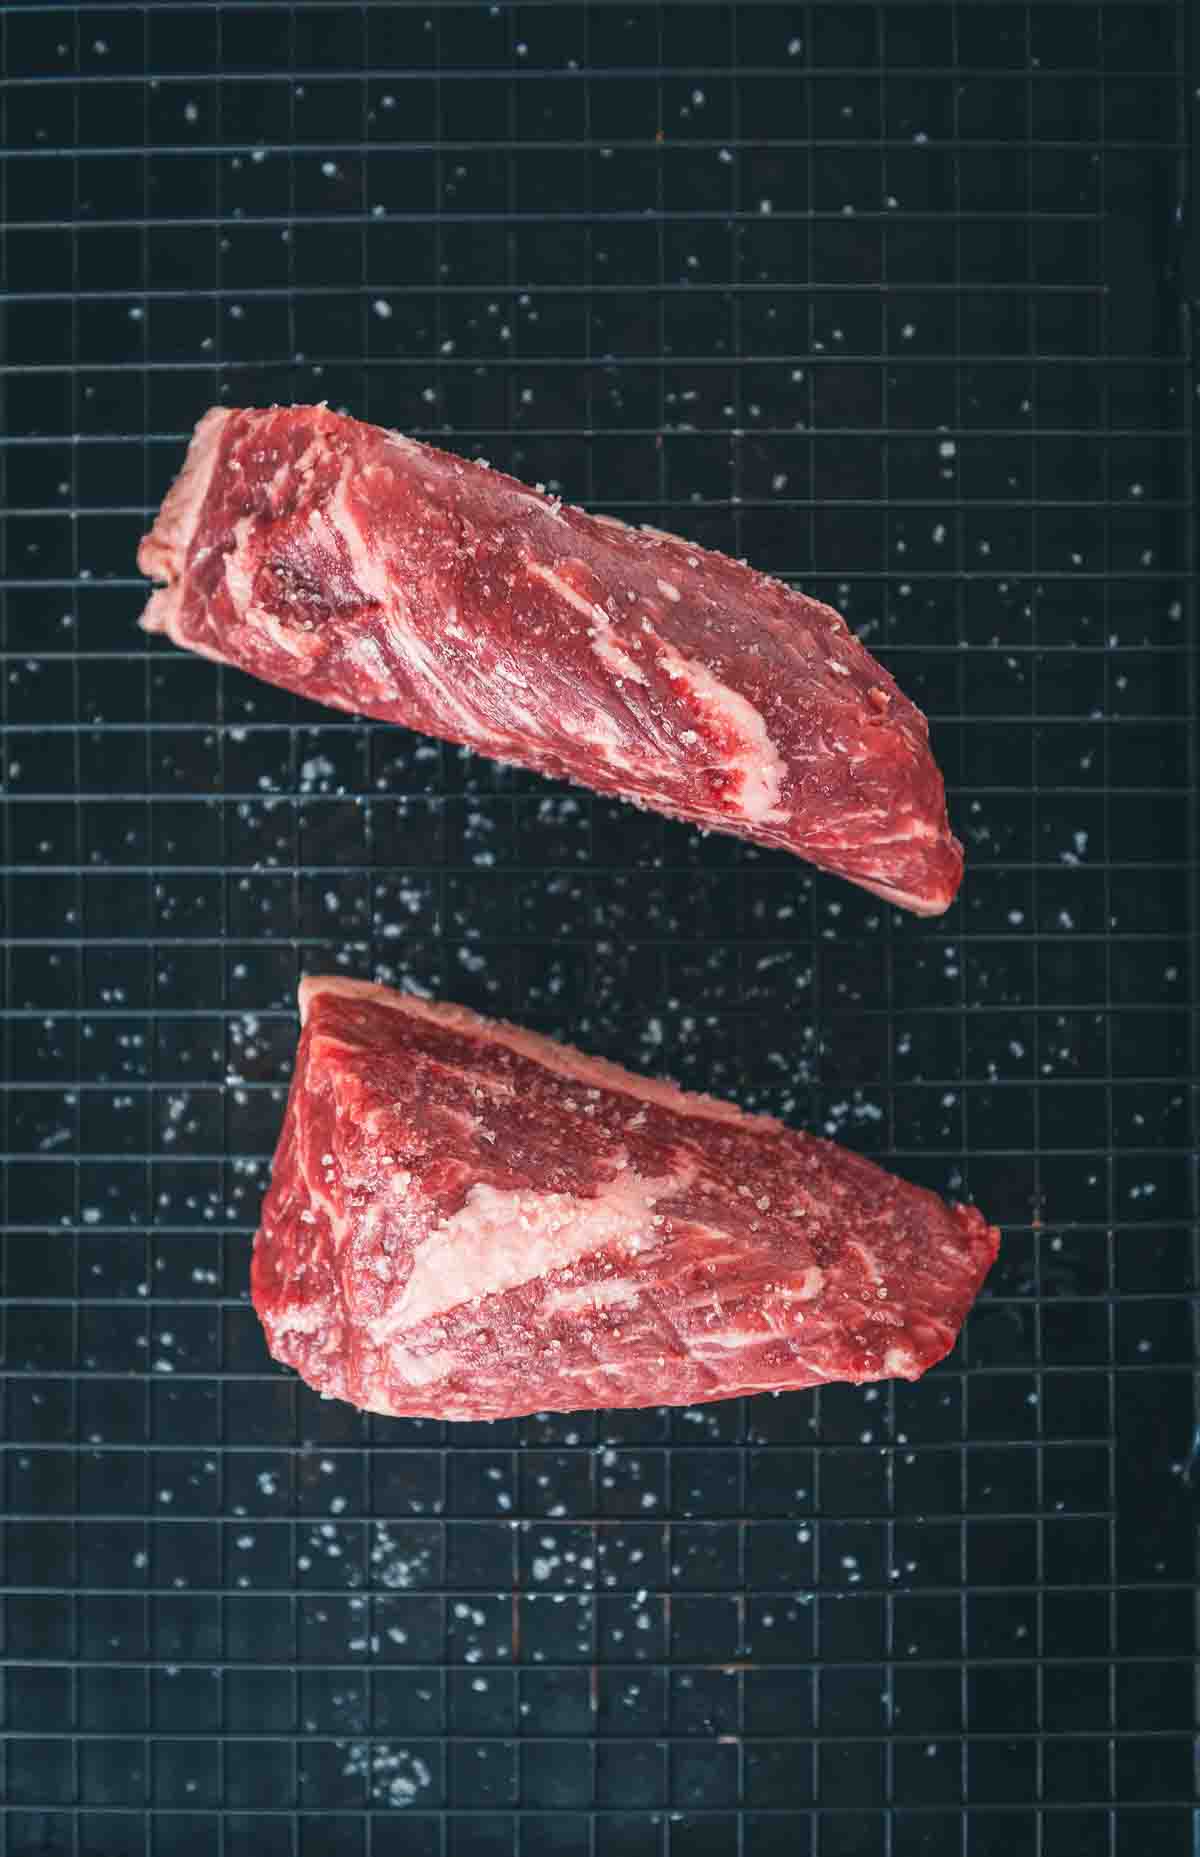 Close up to show salt on steaks. 